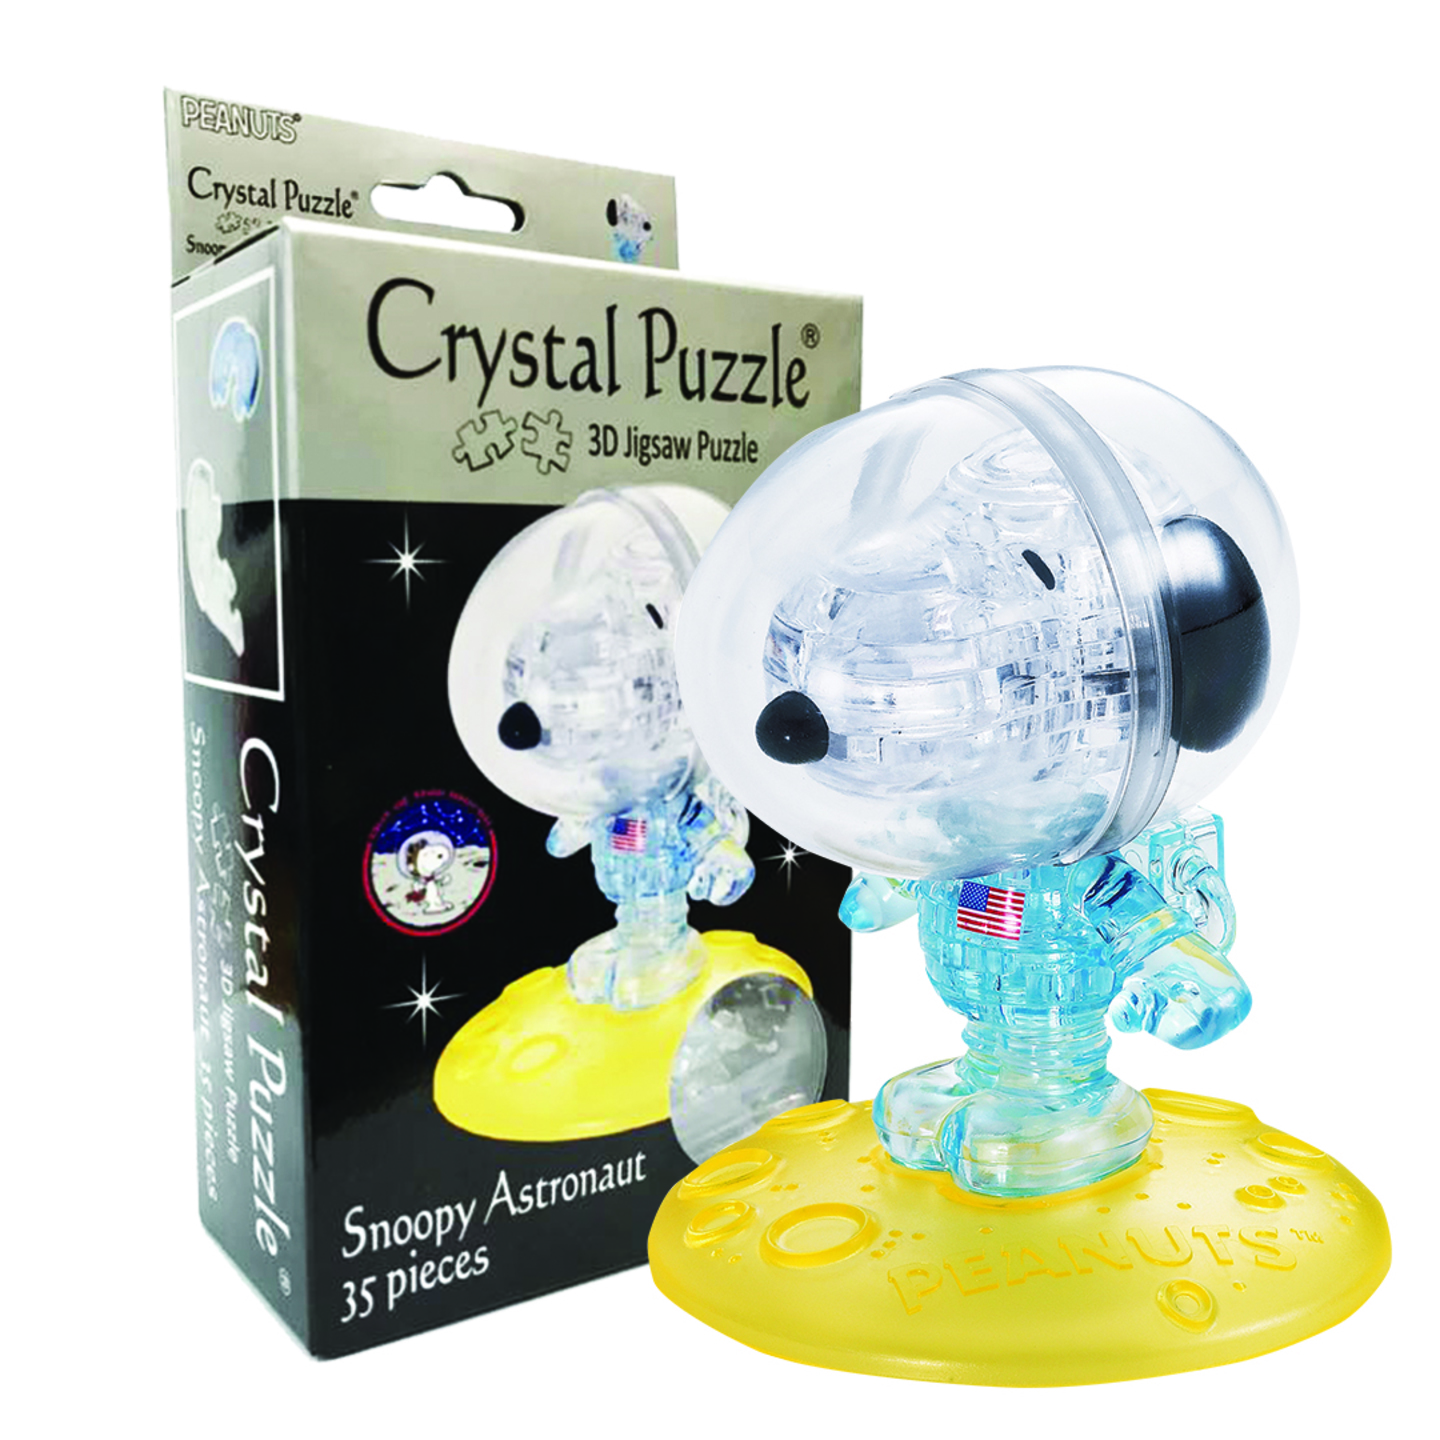 3D Crystal Puzzle Snoopy Astronaut